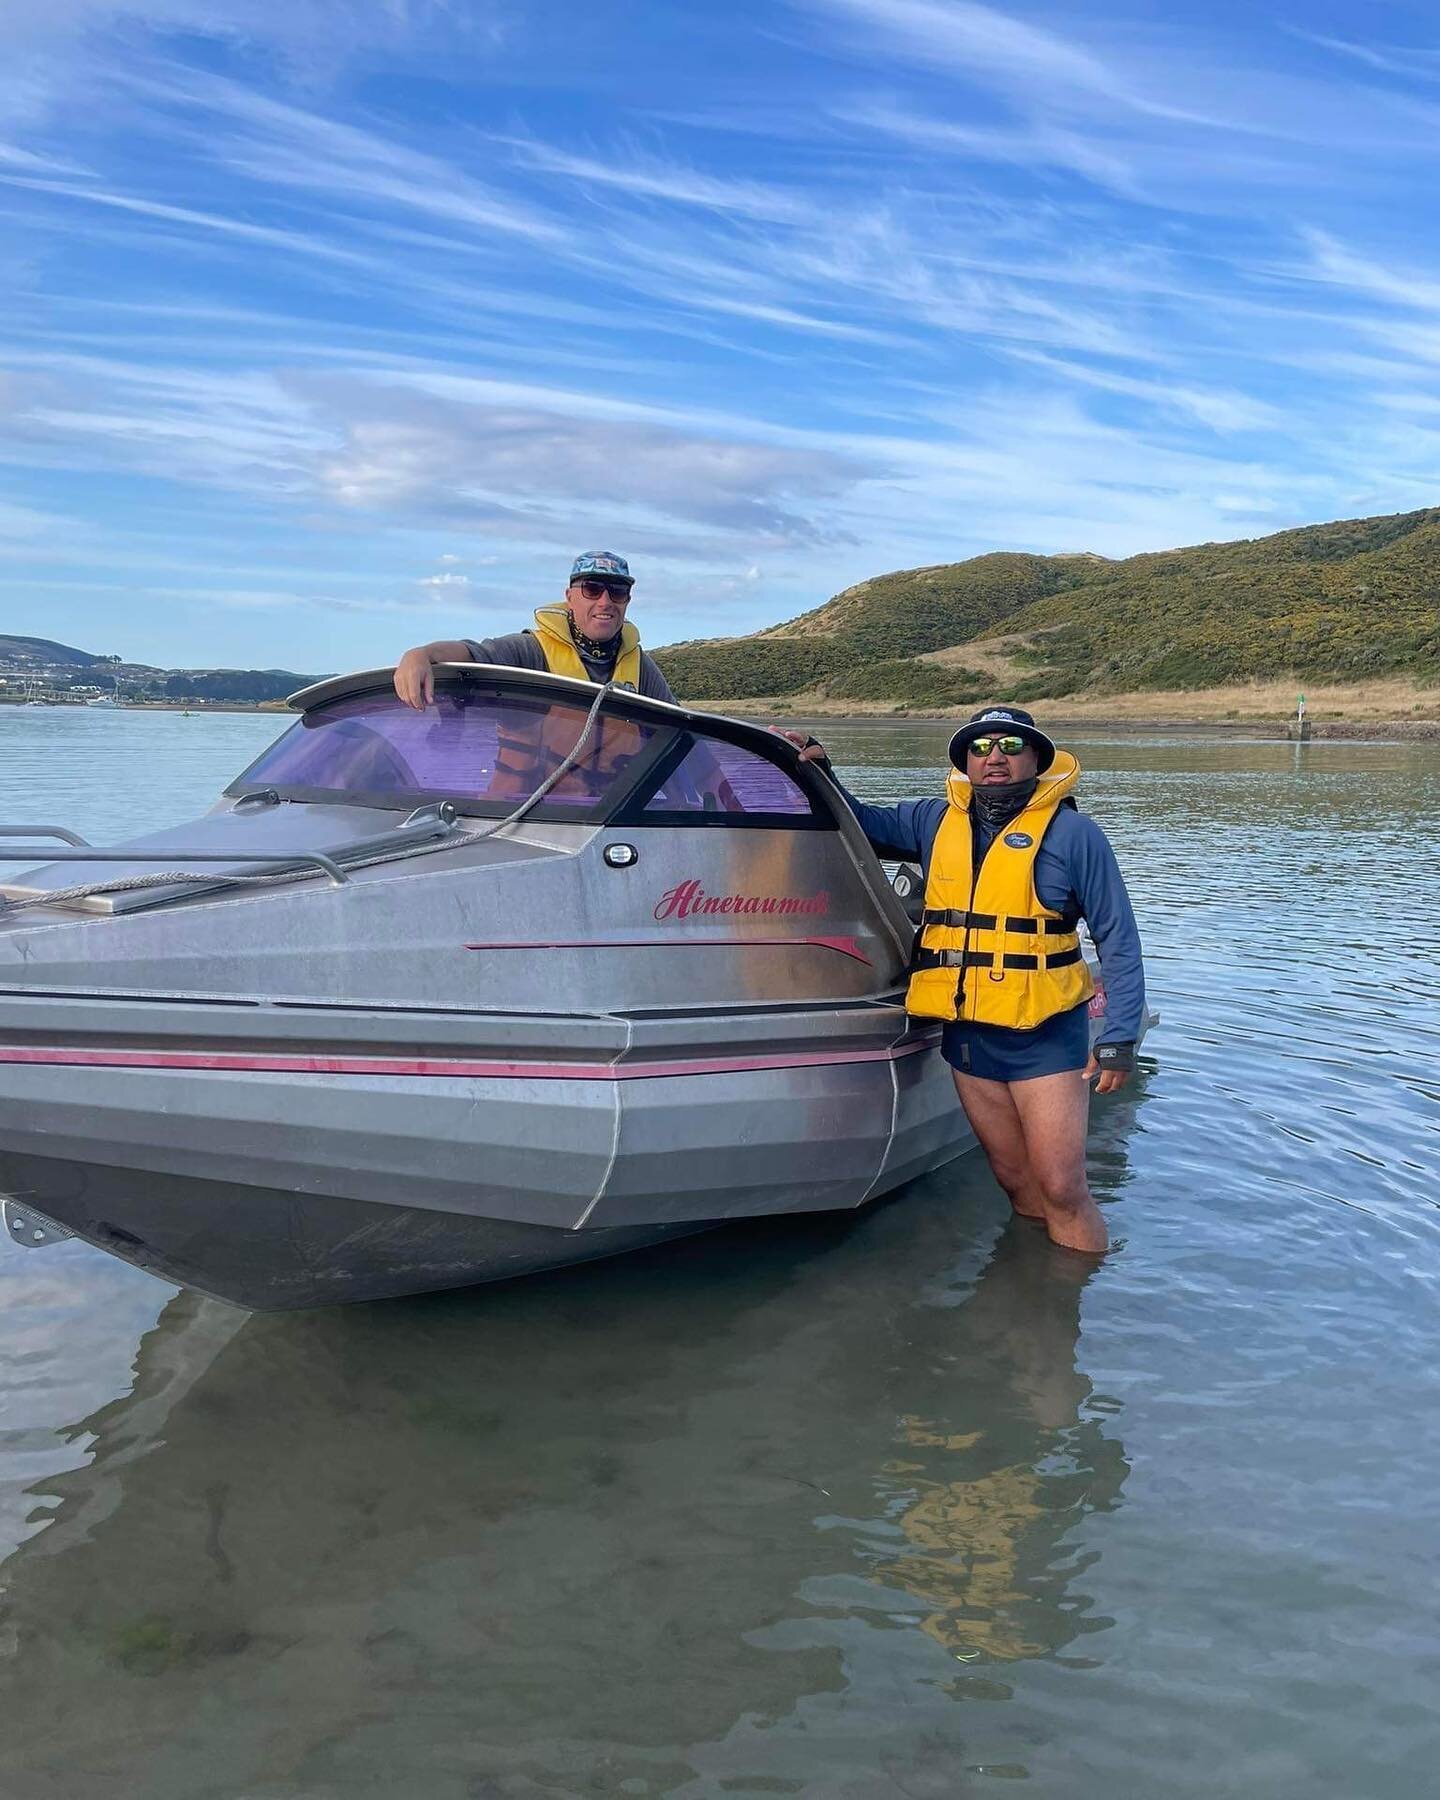 Life jacket ✅ Sun protection ✅ Buddy ✅

Our Ruku Kai leads Rob and Ben had a great day on the water with Evan Hughes a senior advisor at NZ Search and Rescue yesterday. 

NZSAR provide strategic leadership for the NZ search and rescue sector througho